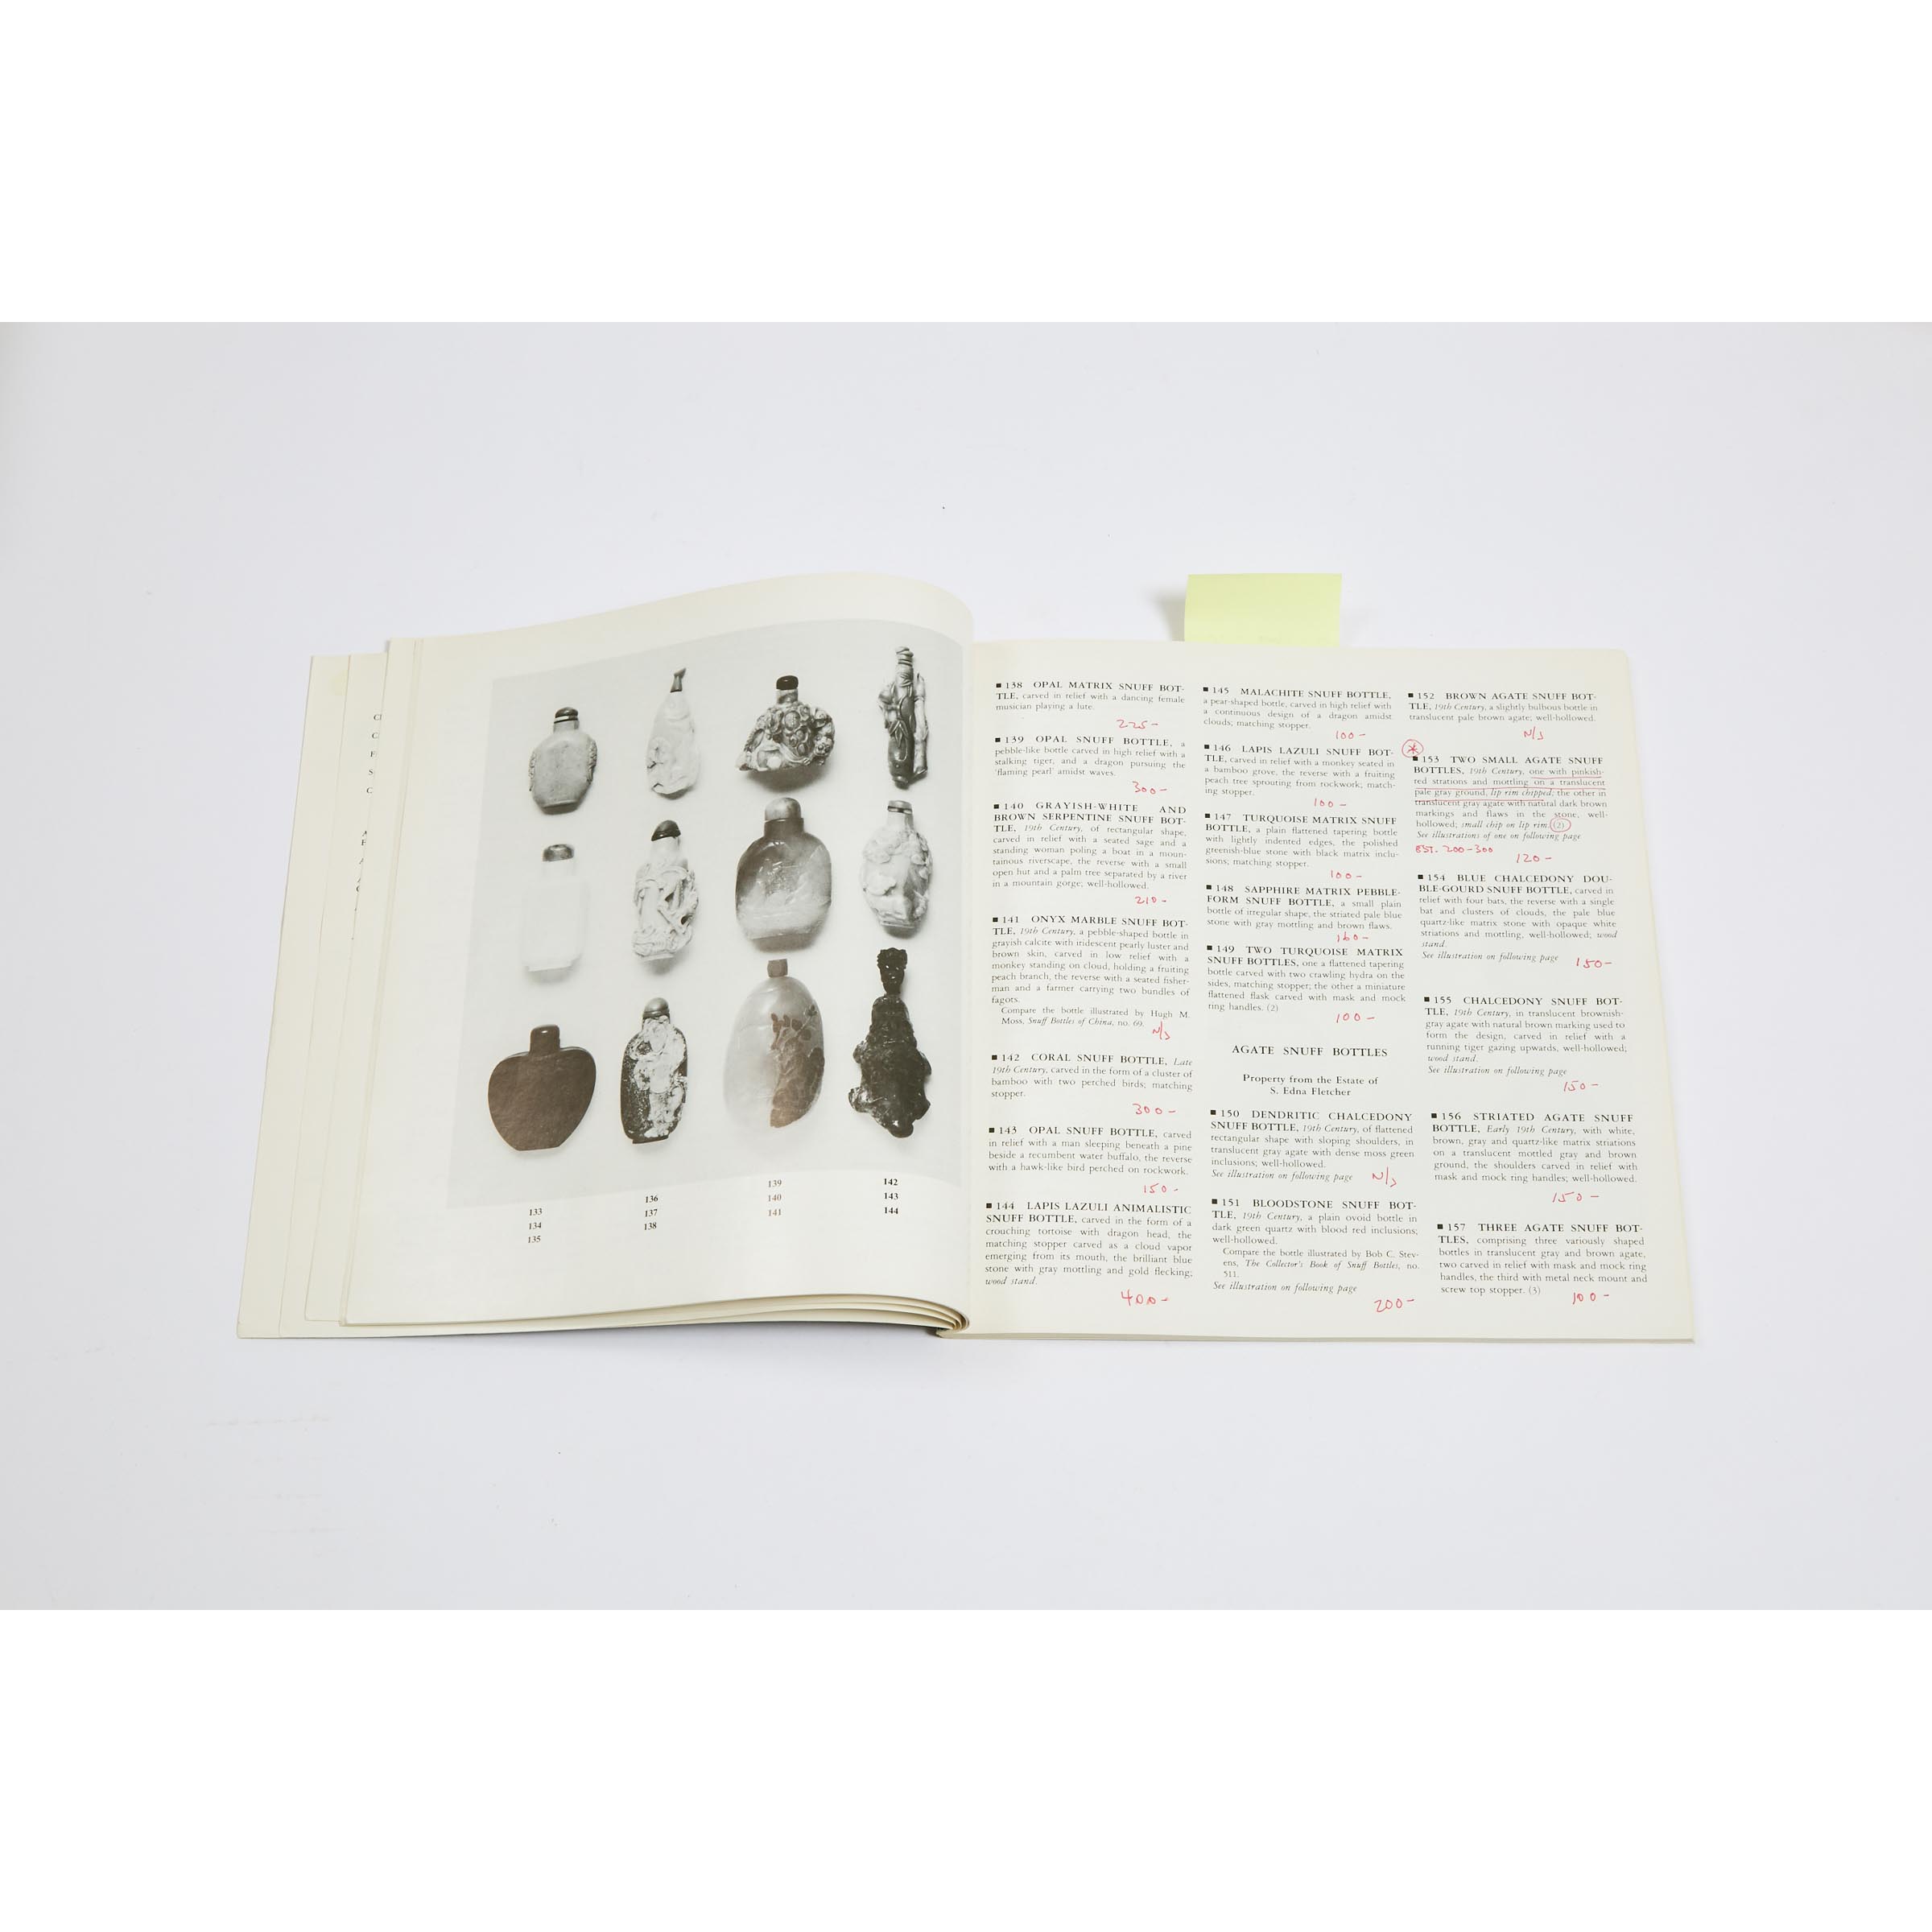 A Large Group of One Hundred Twenty-Nine Sotheby's and Parke-Bernet Snuff Bottle and Asian Art Catalogues, 1944-2015